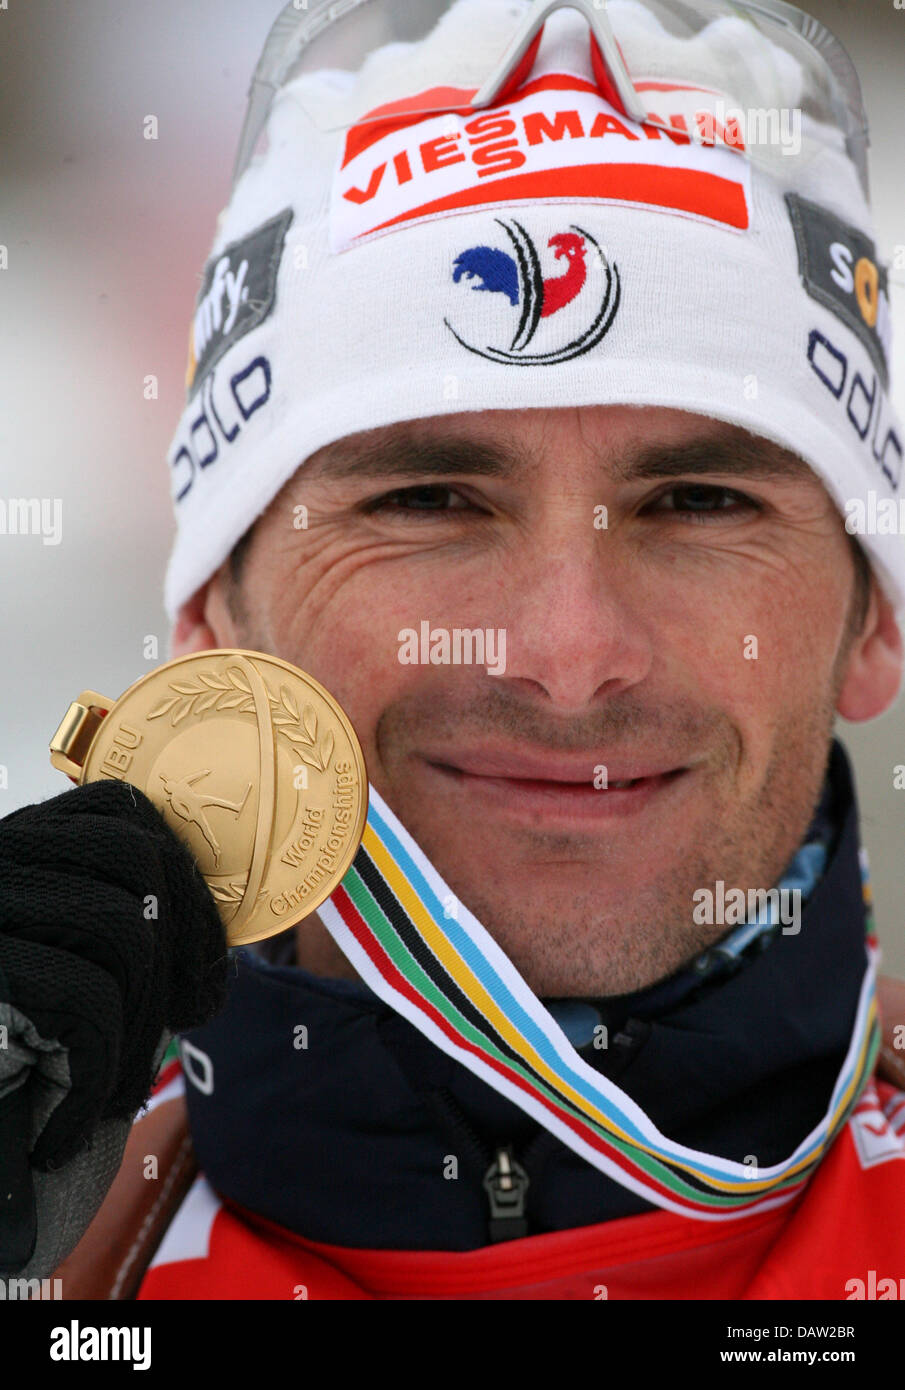 French Raphael Poiree happily poses with his gold medal after the men's 20km competition at the Biathlon World Championships 2007 in Antholz, Italy, Tuesday, 6 February 2007. German Greis won the silver medal behind French gold medalist Raphael Poiree and in front of bronze medalist Michal Slesingr from Czechia. Photo: Martin Schutt Stock Photo